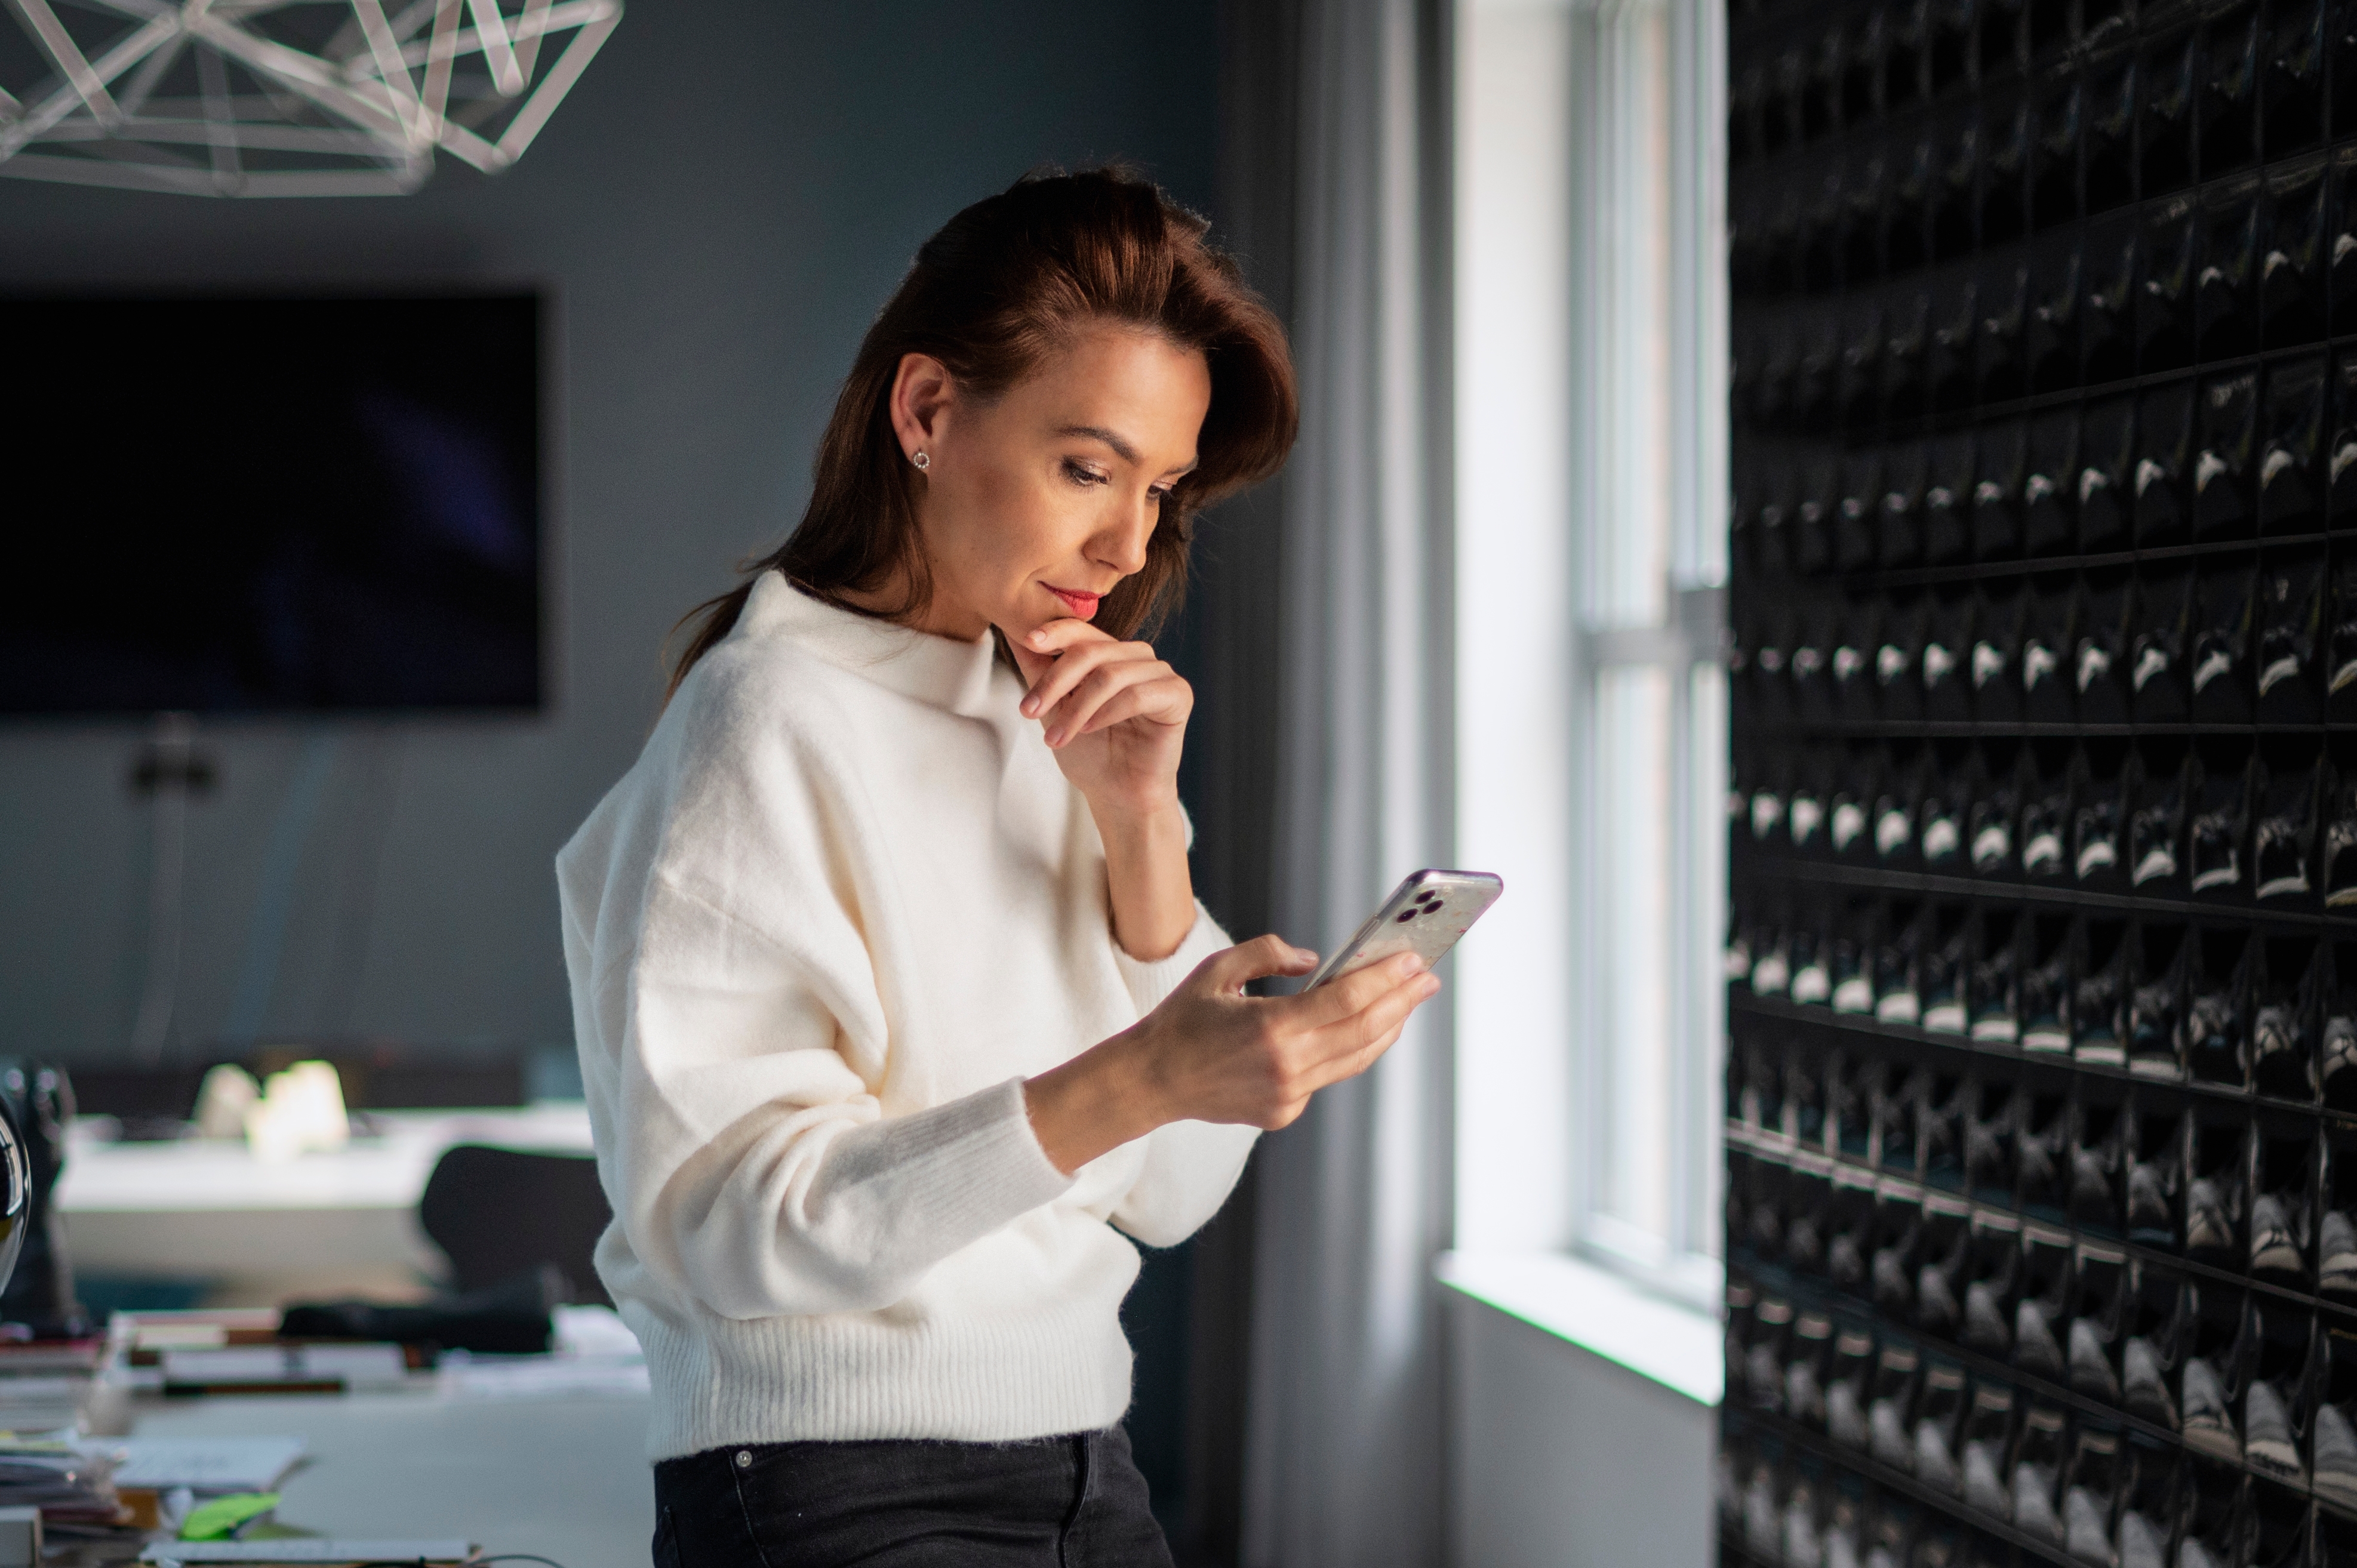 A middle-aged businesswoman standing in the office and using a smartphone. | Source: Shutterstock